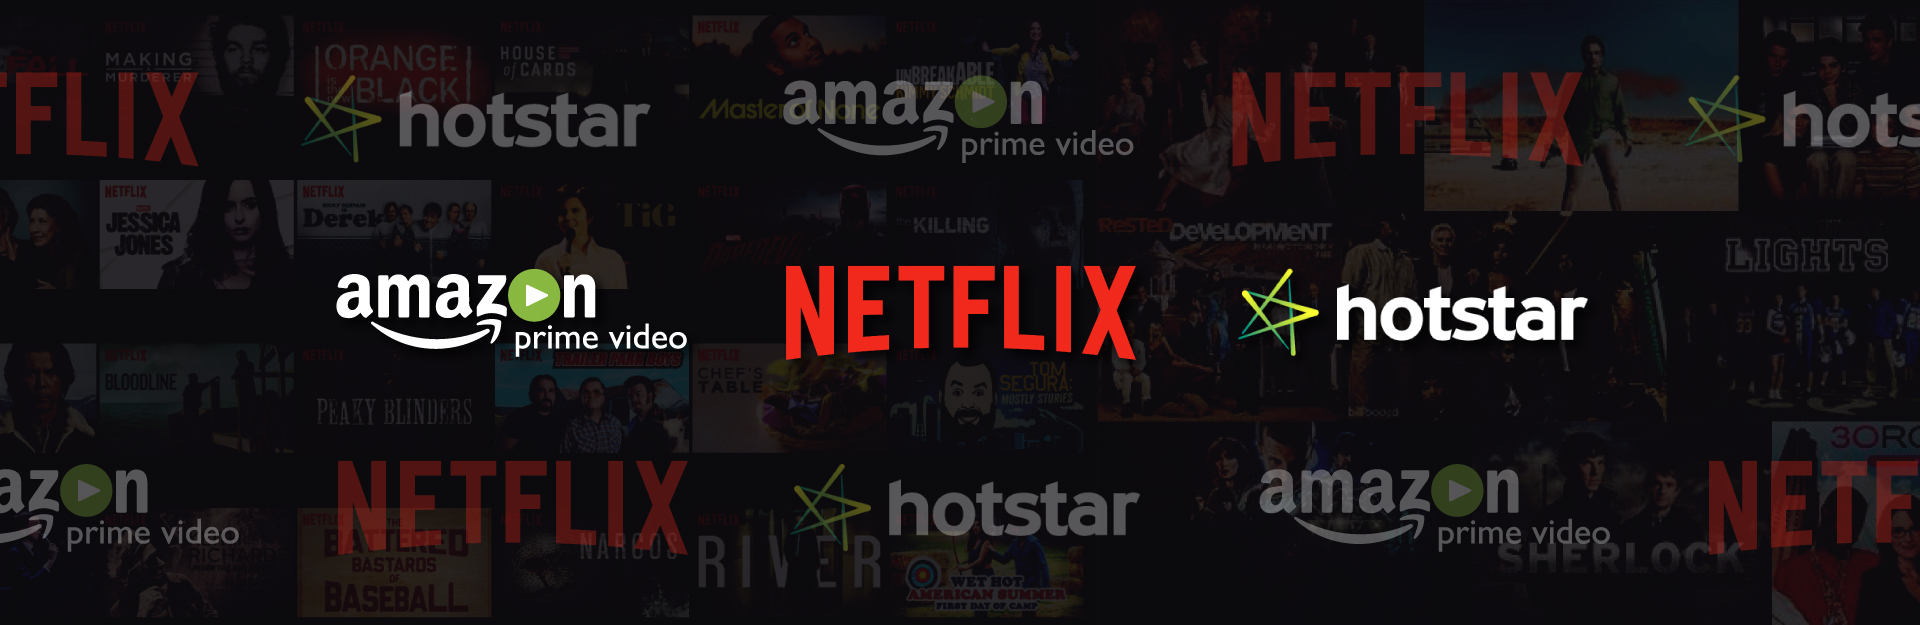 Amazon Prime Video Vs Hotstar Vs Netflix Which Is The Best Video Streaming